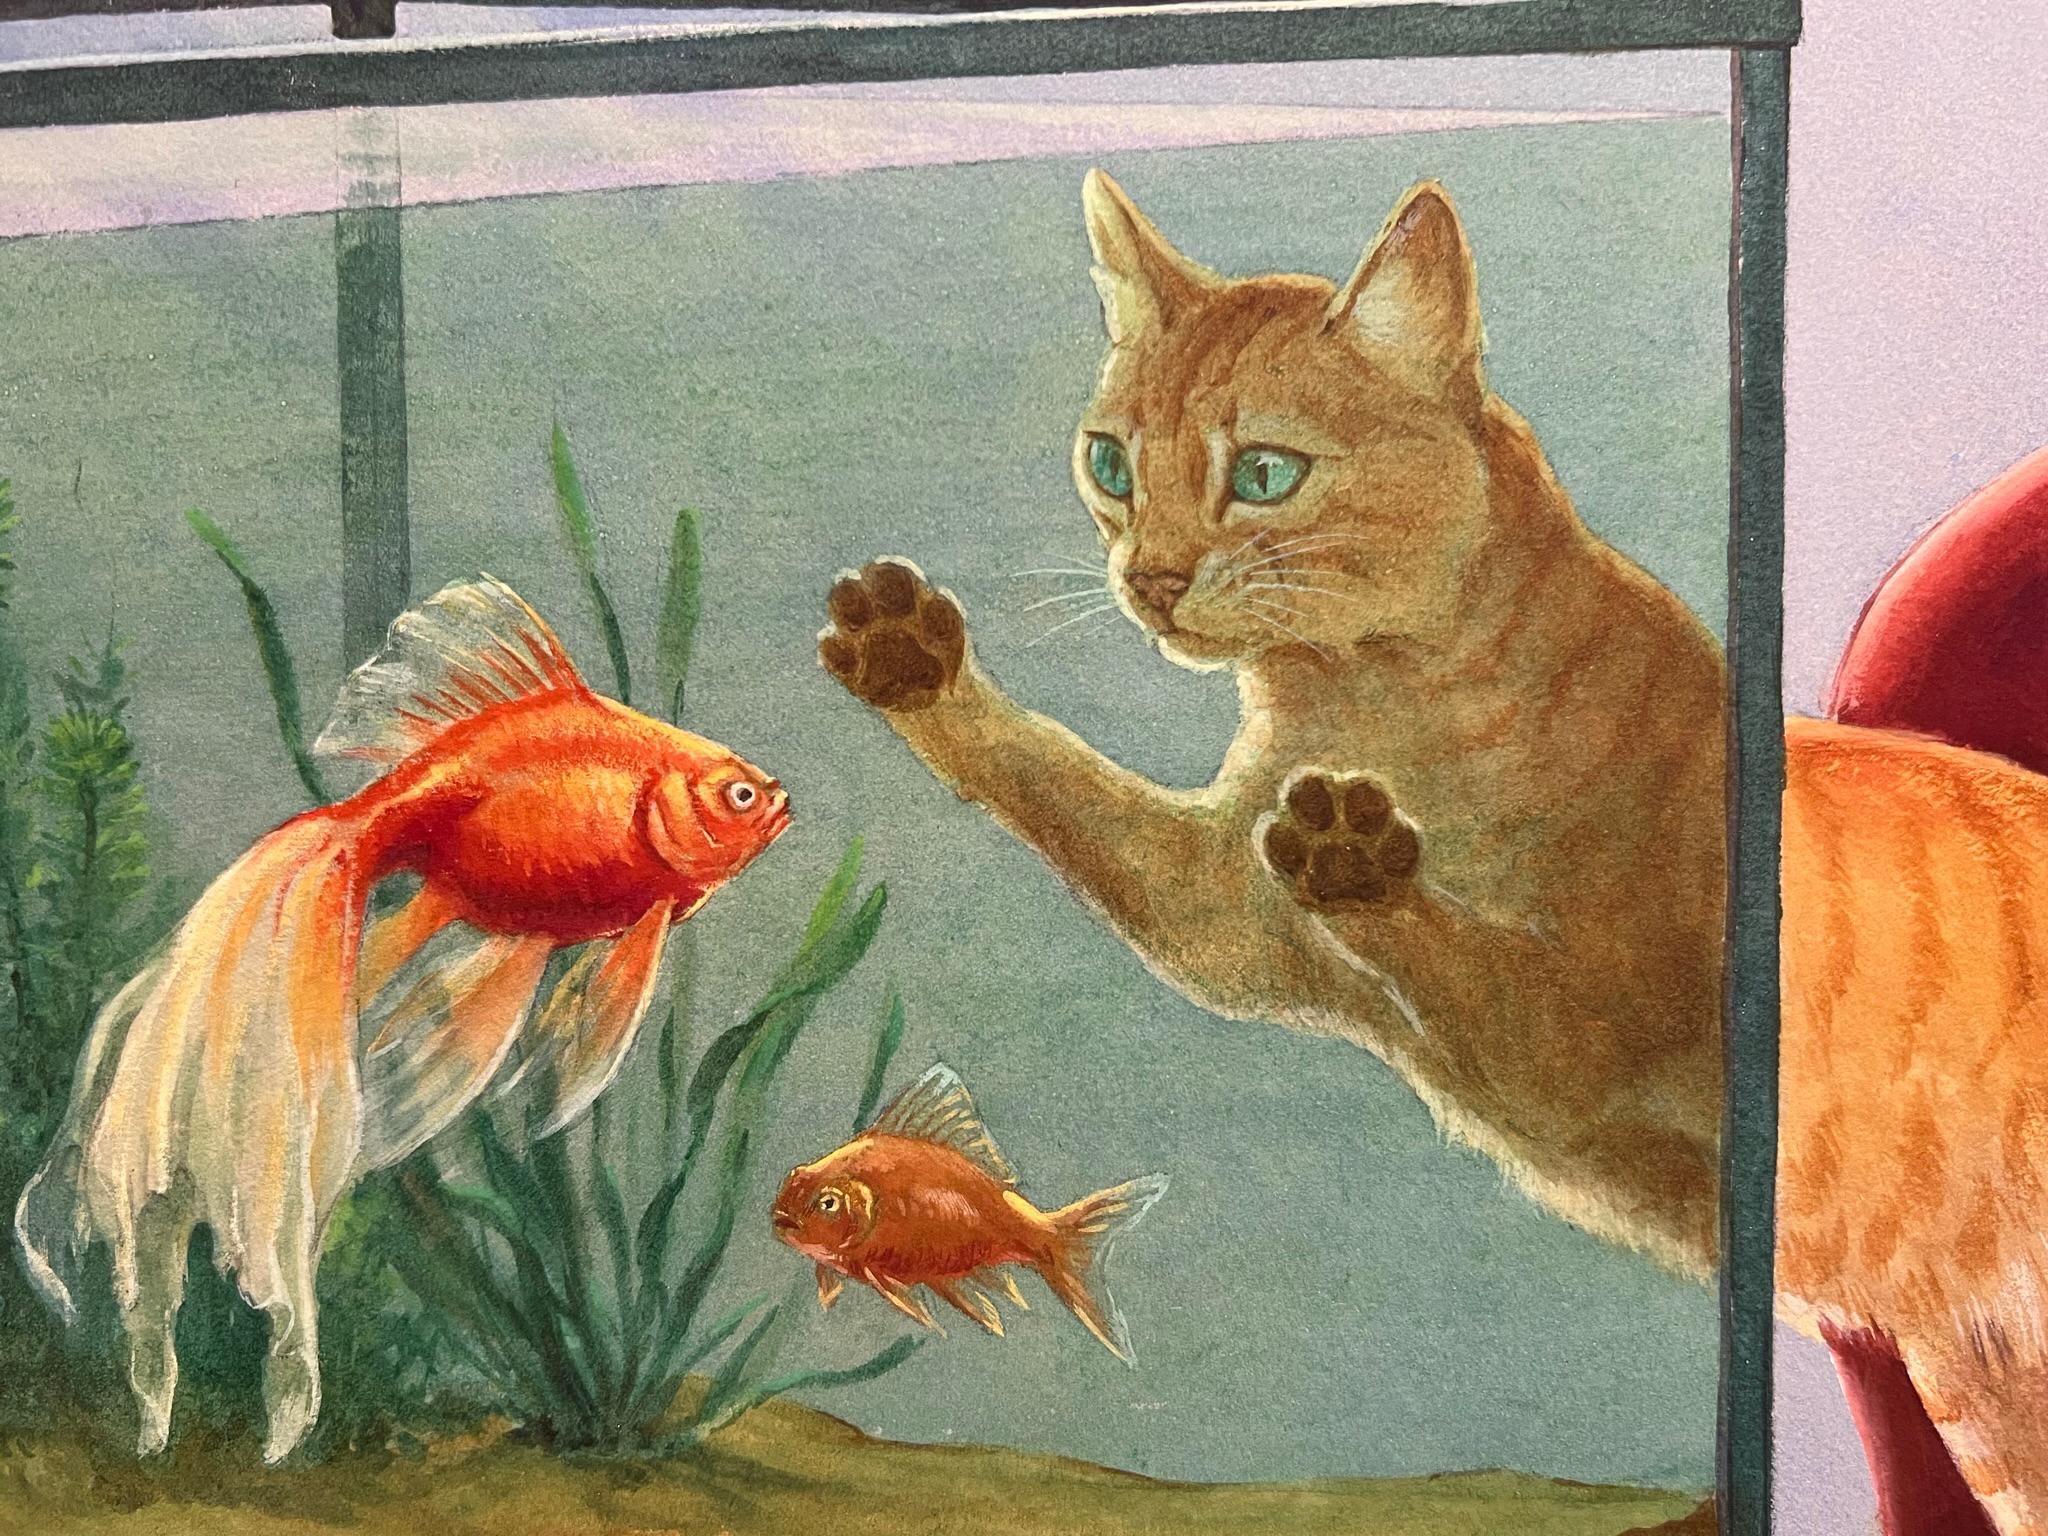 National Geographic Artist CAT W/ FISH TANK - Painting by Walter A. Webber